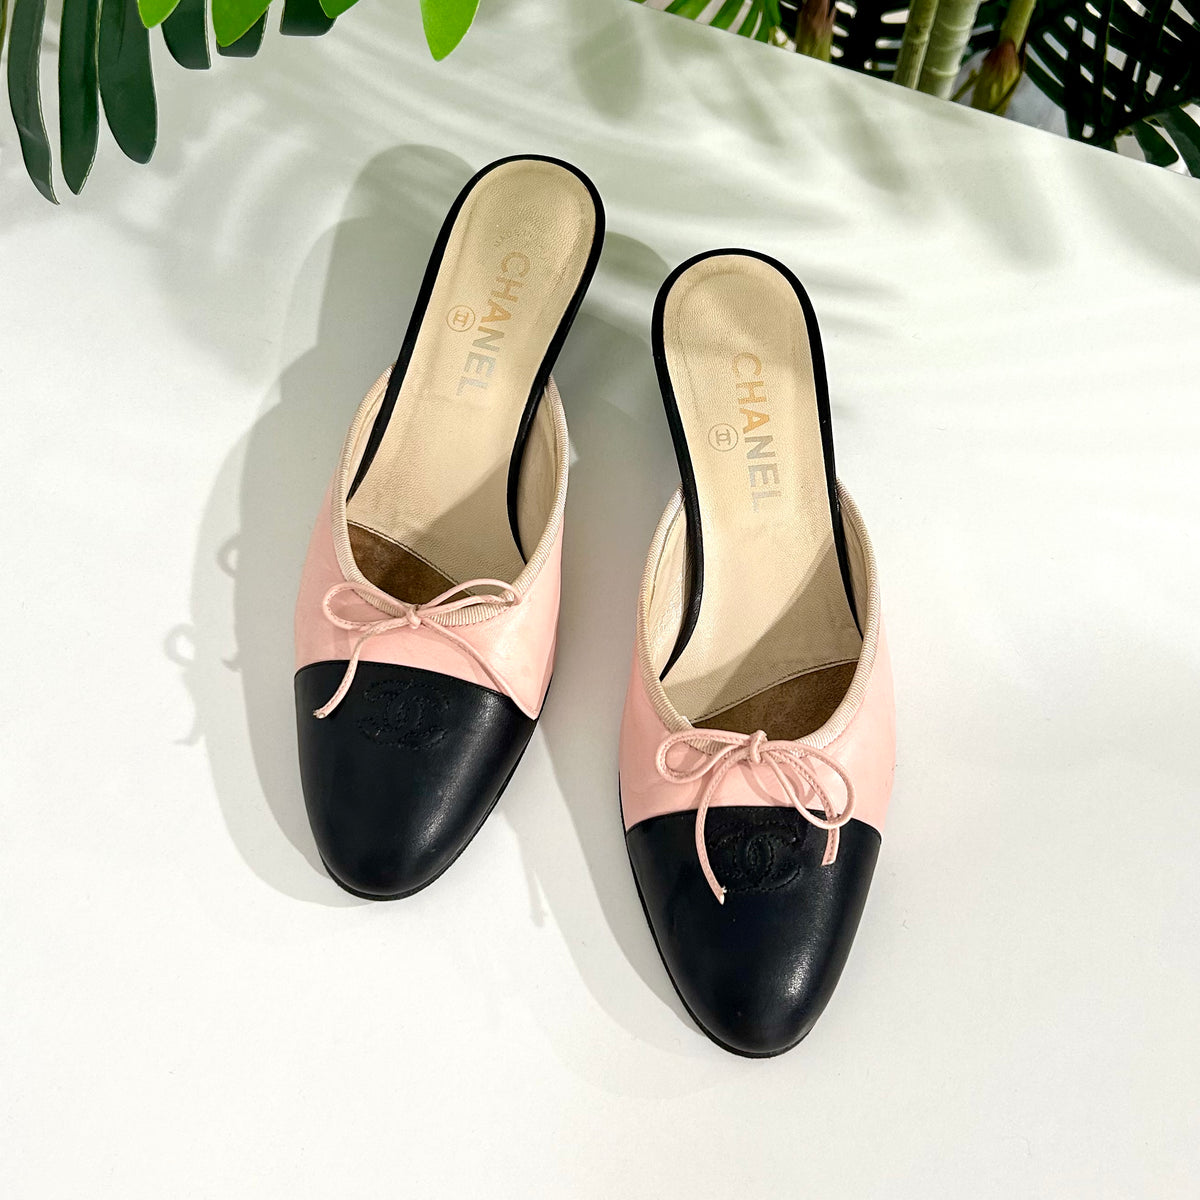 Pre-Owned & Vintage CHANEL Mules for Women